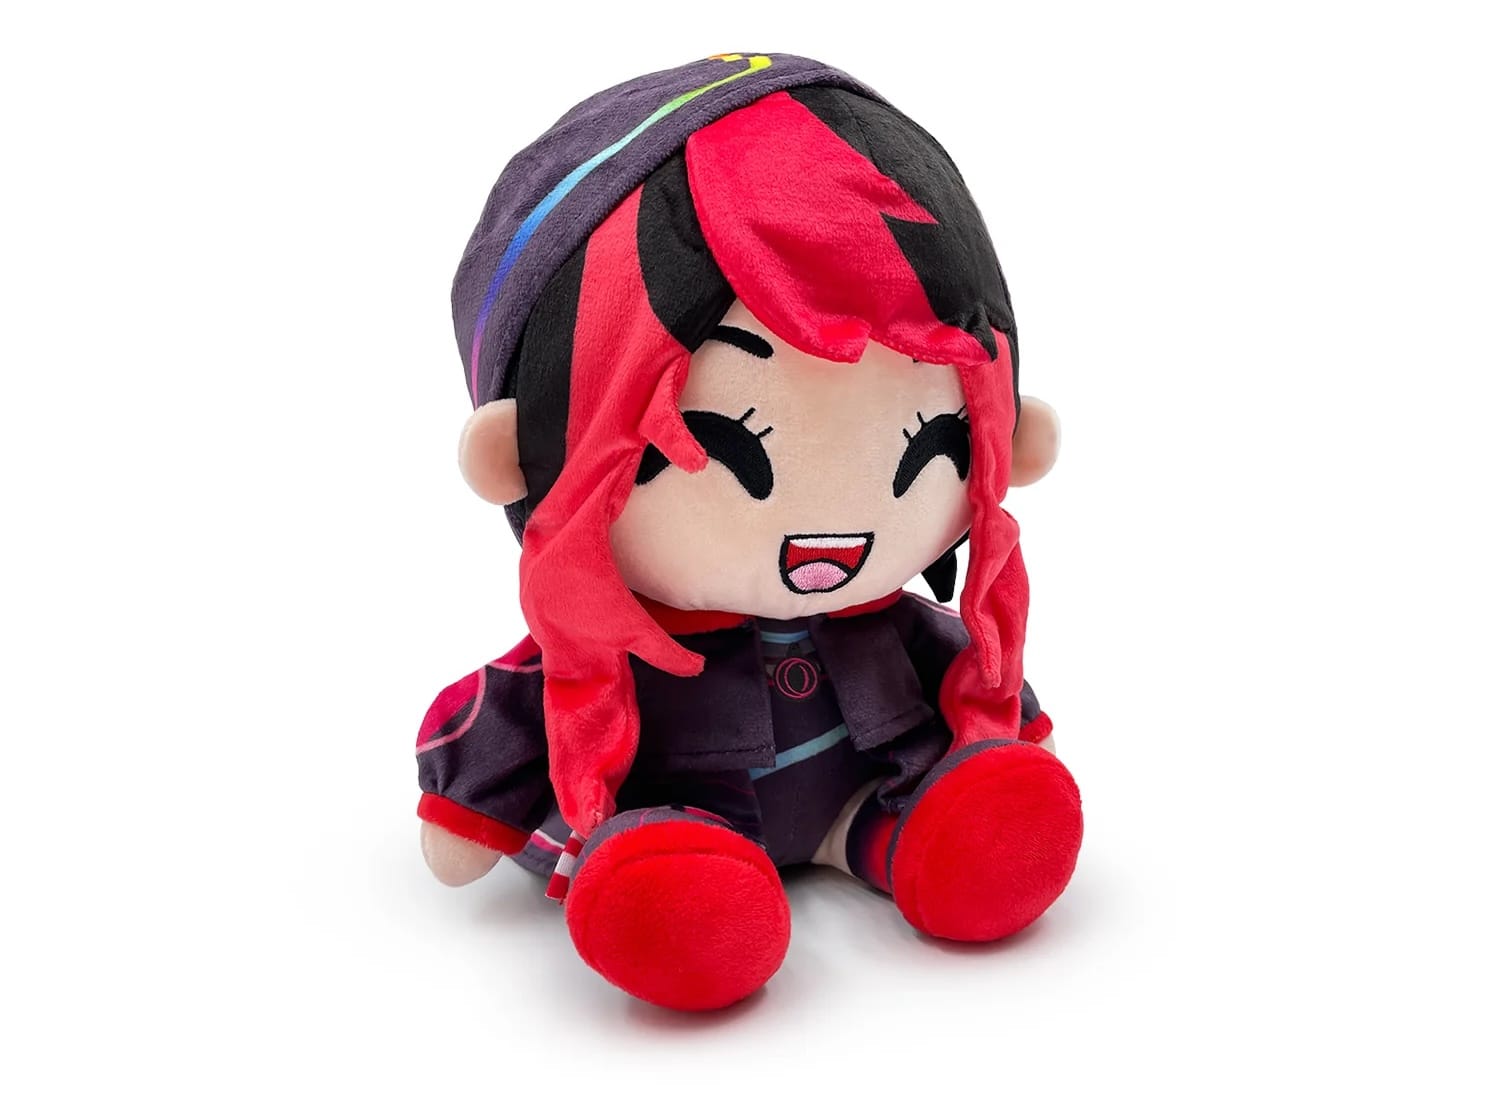 Plush toy of animated character with red hair and black/purple outfit